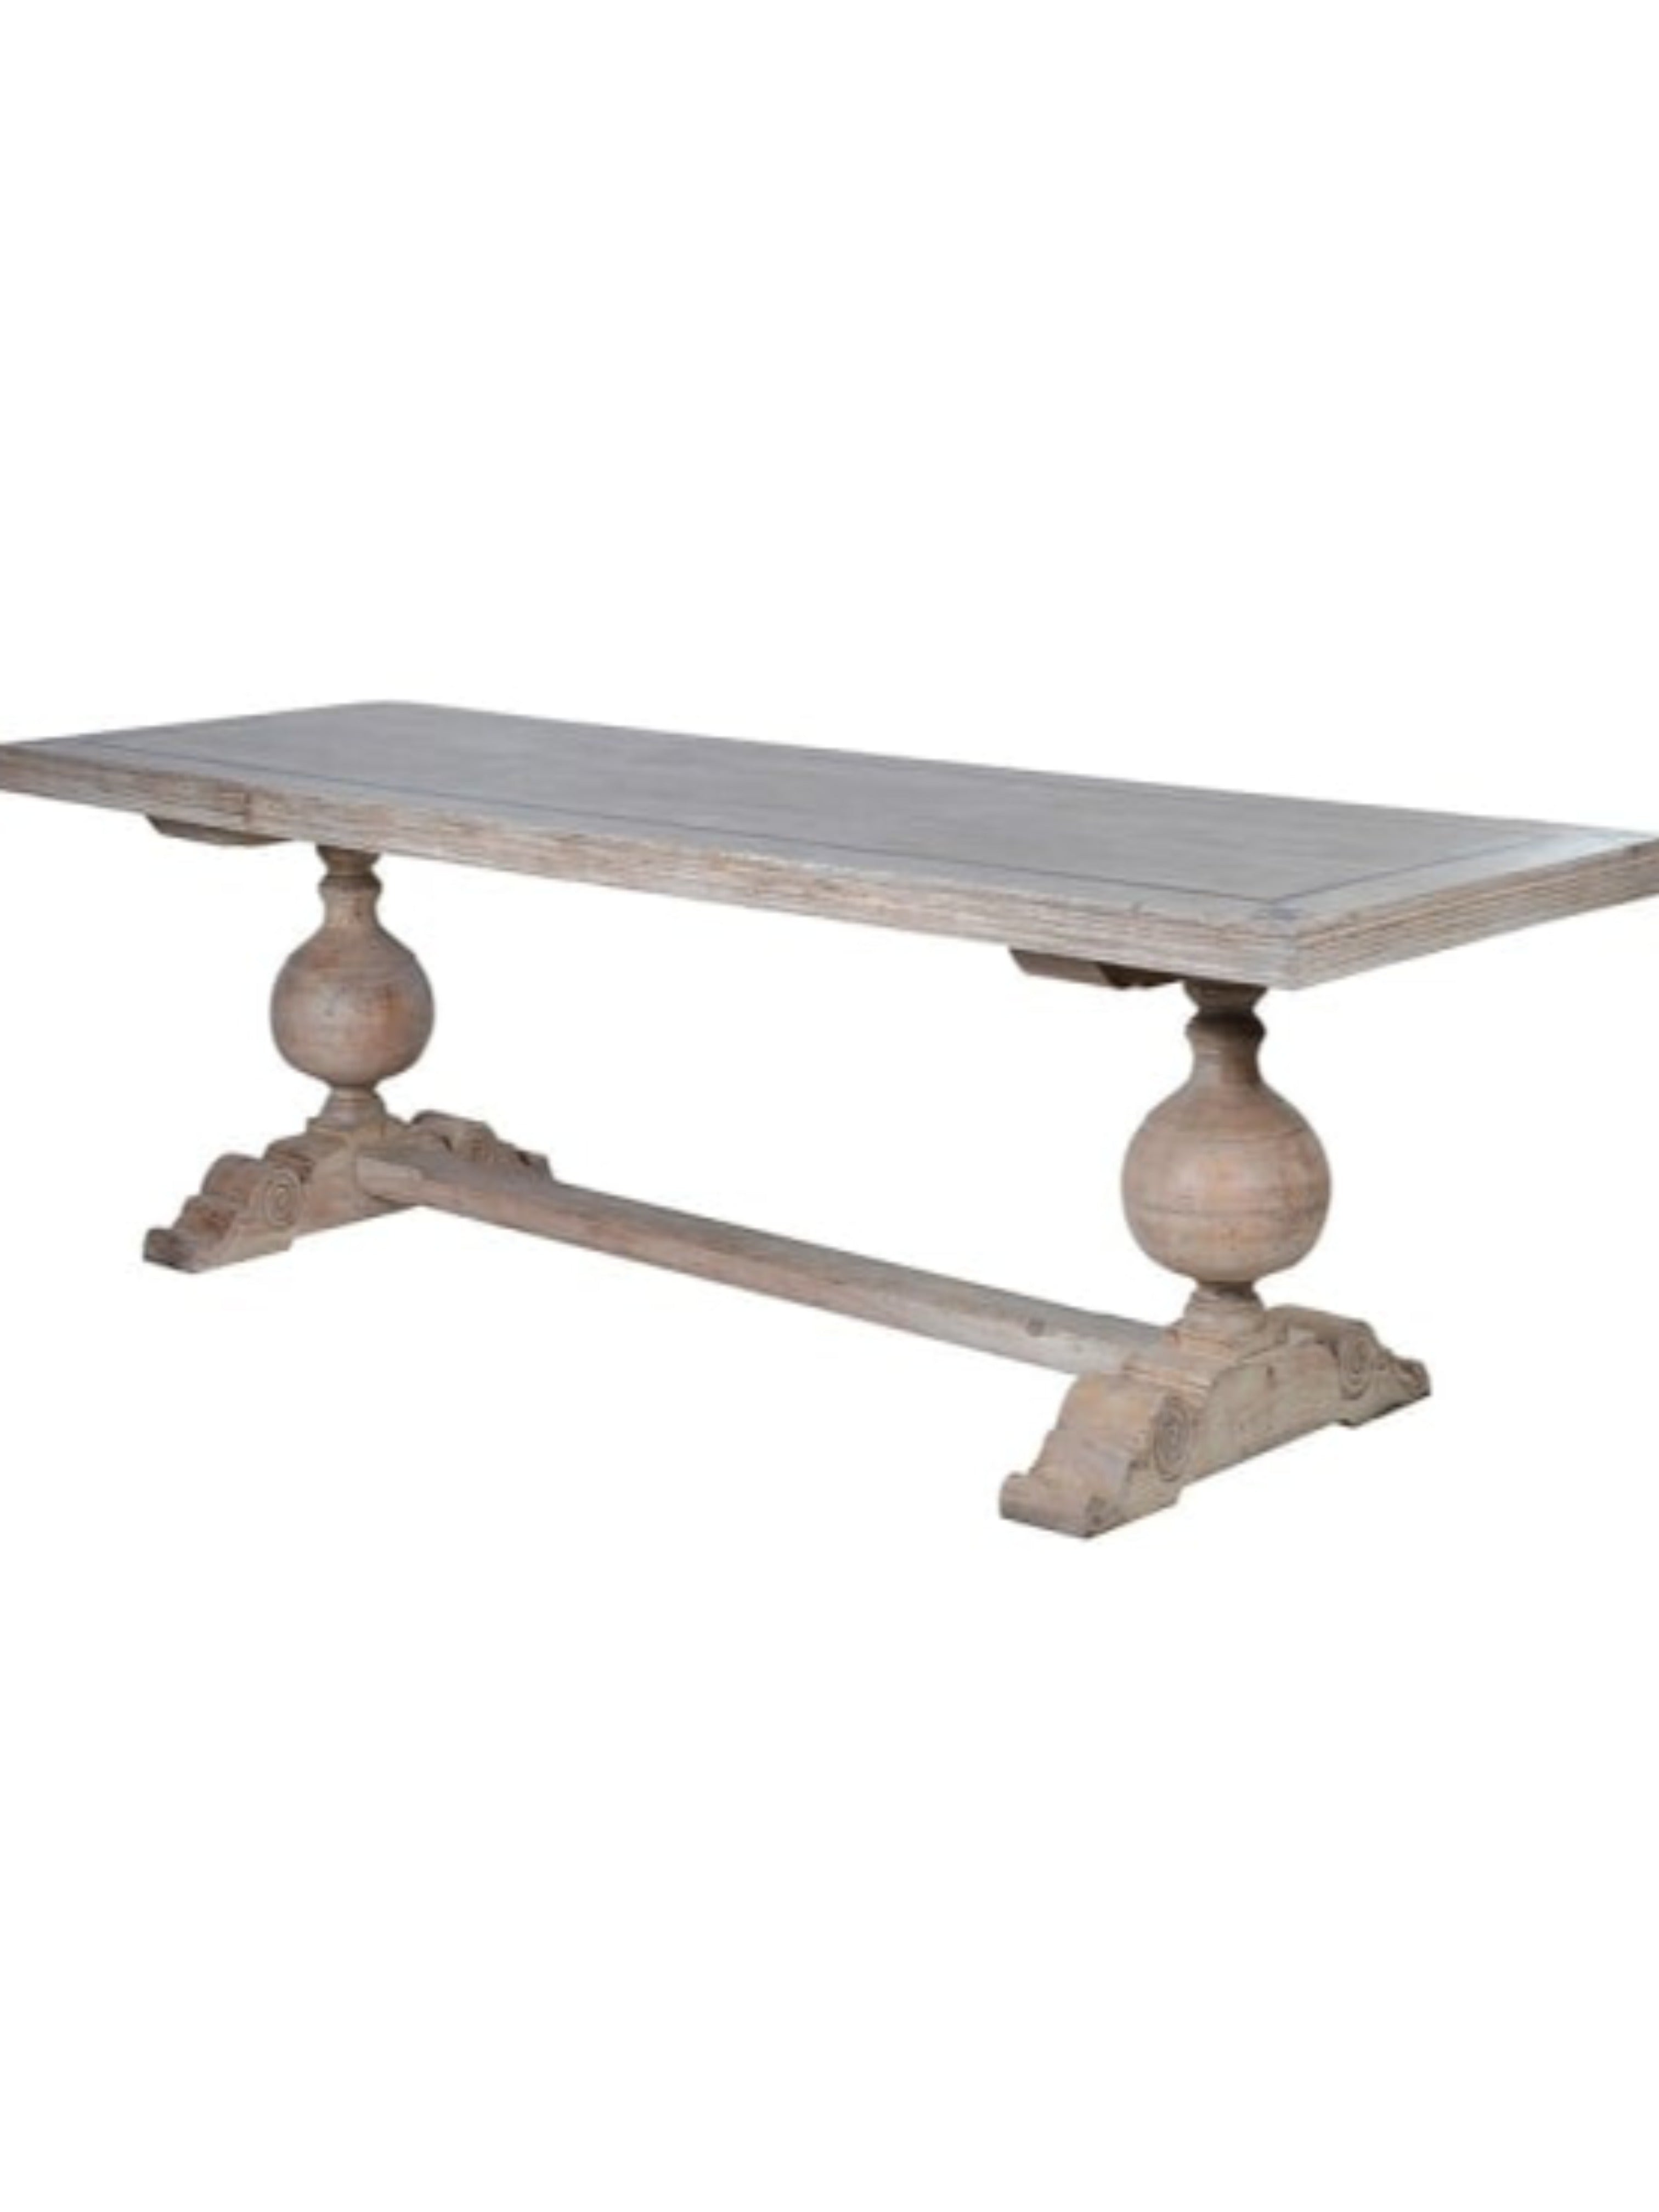 Imperial Large Wooden Dining Table with Inlay